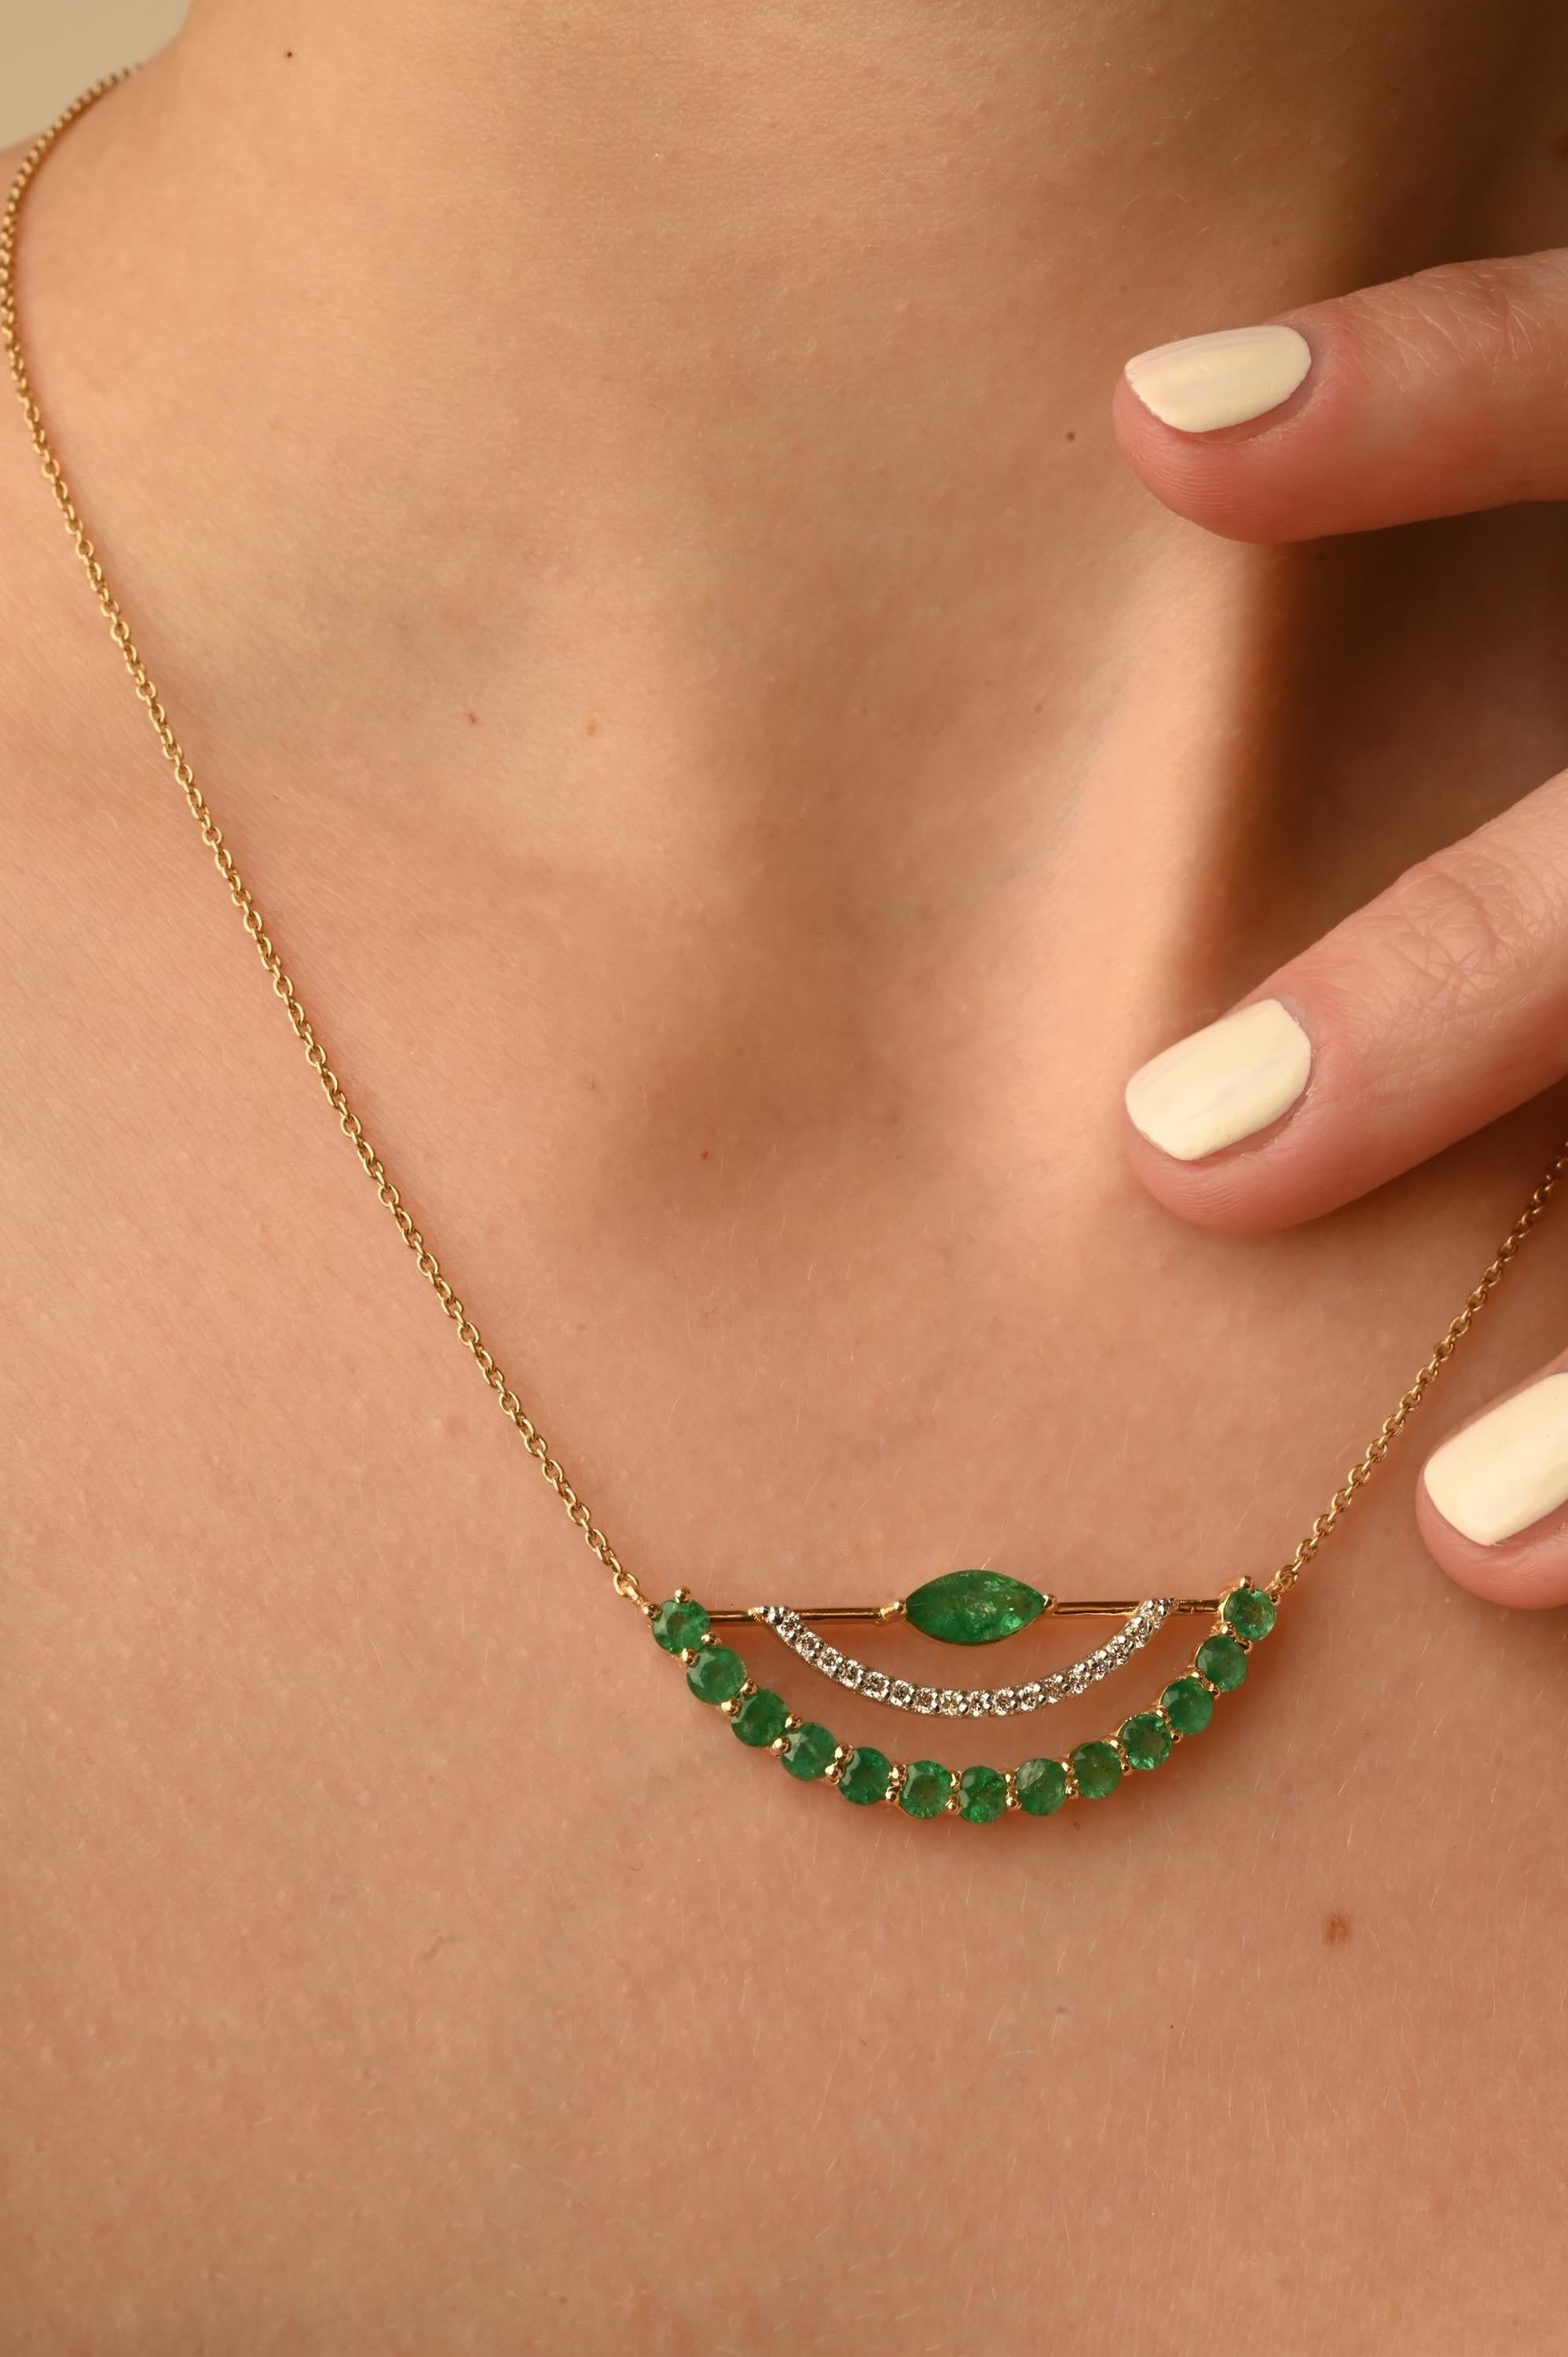 Emerald chain necklace in 14K gold studded with marquise and round cut emerald gemstones with diamonds. Lightweight and gorgeous, this is a great bridesmaid, wedding gift for anyone on your list.
Accessorize your look with this elegant emerald